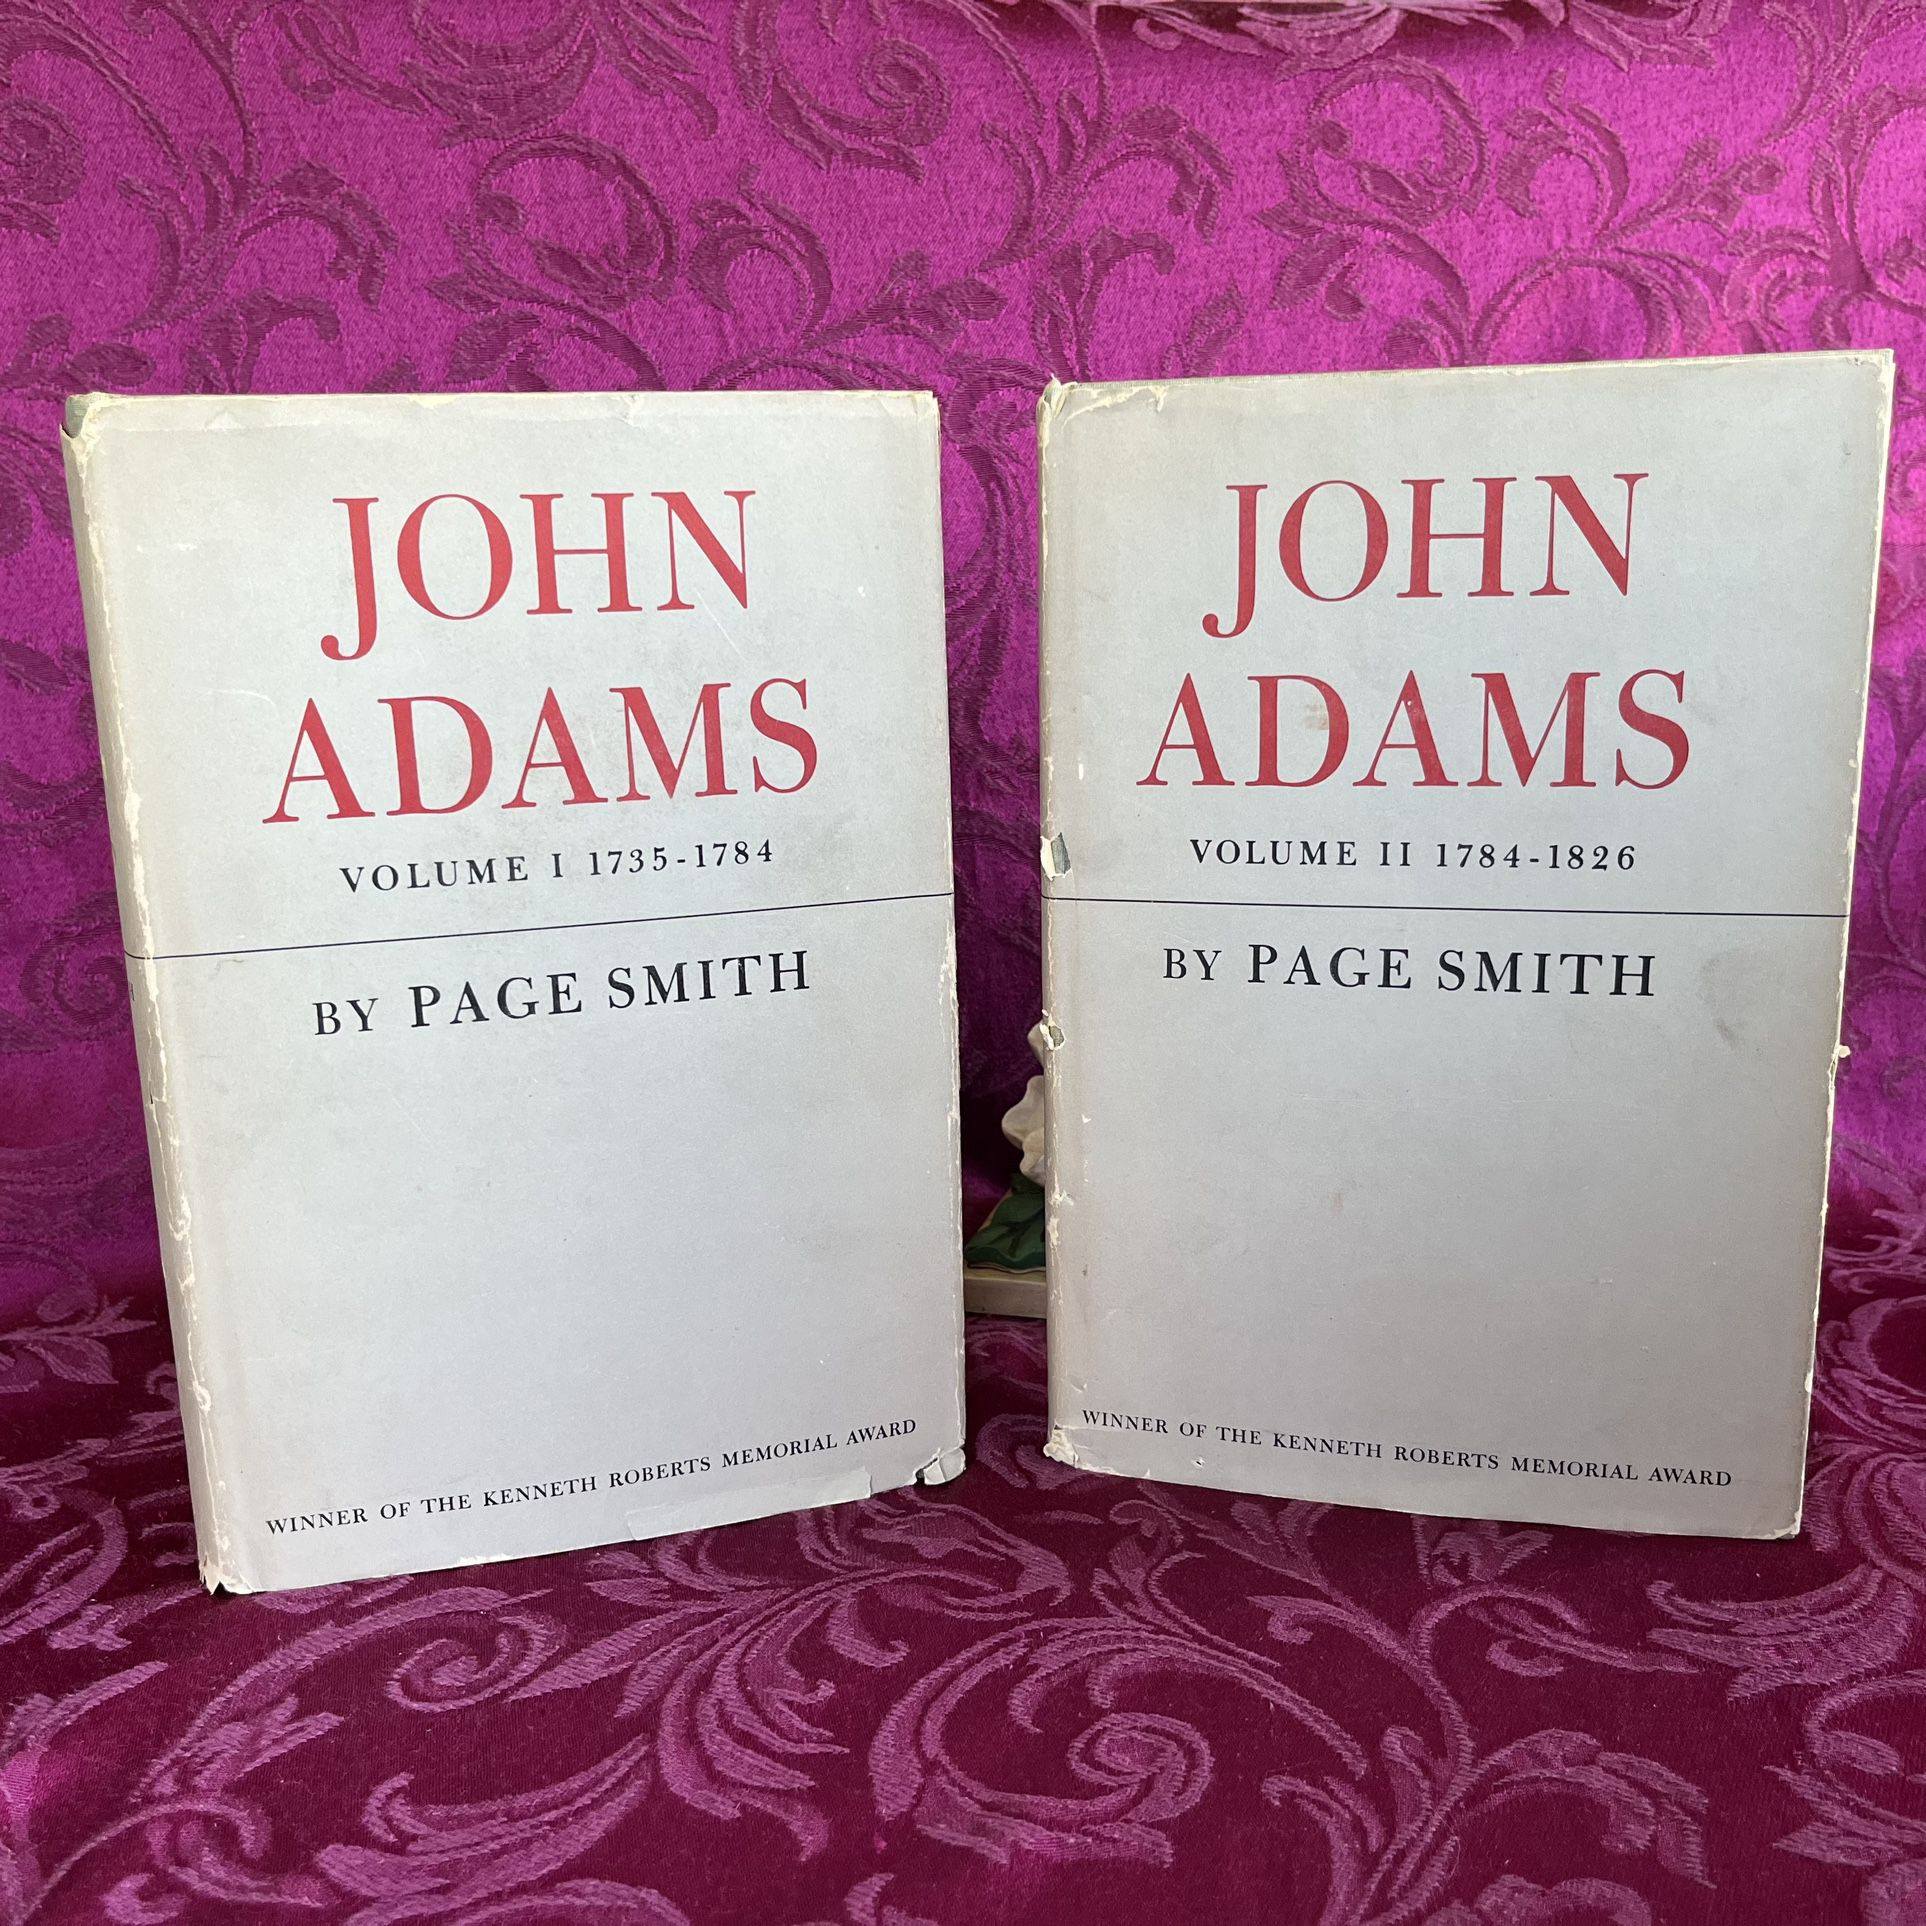 1962 Vintage Books: John Adams Vols I & 2 by Page Smith. First Edition (Stated) 